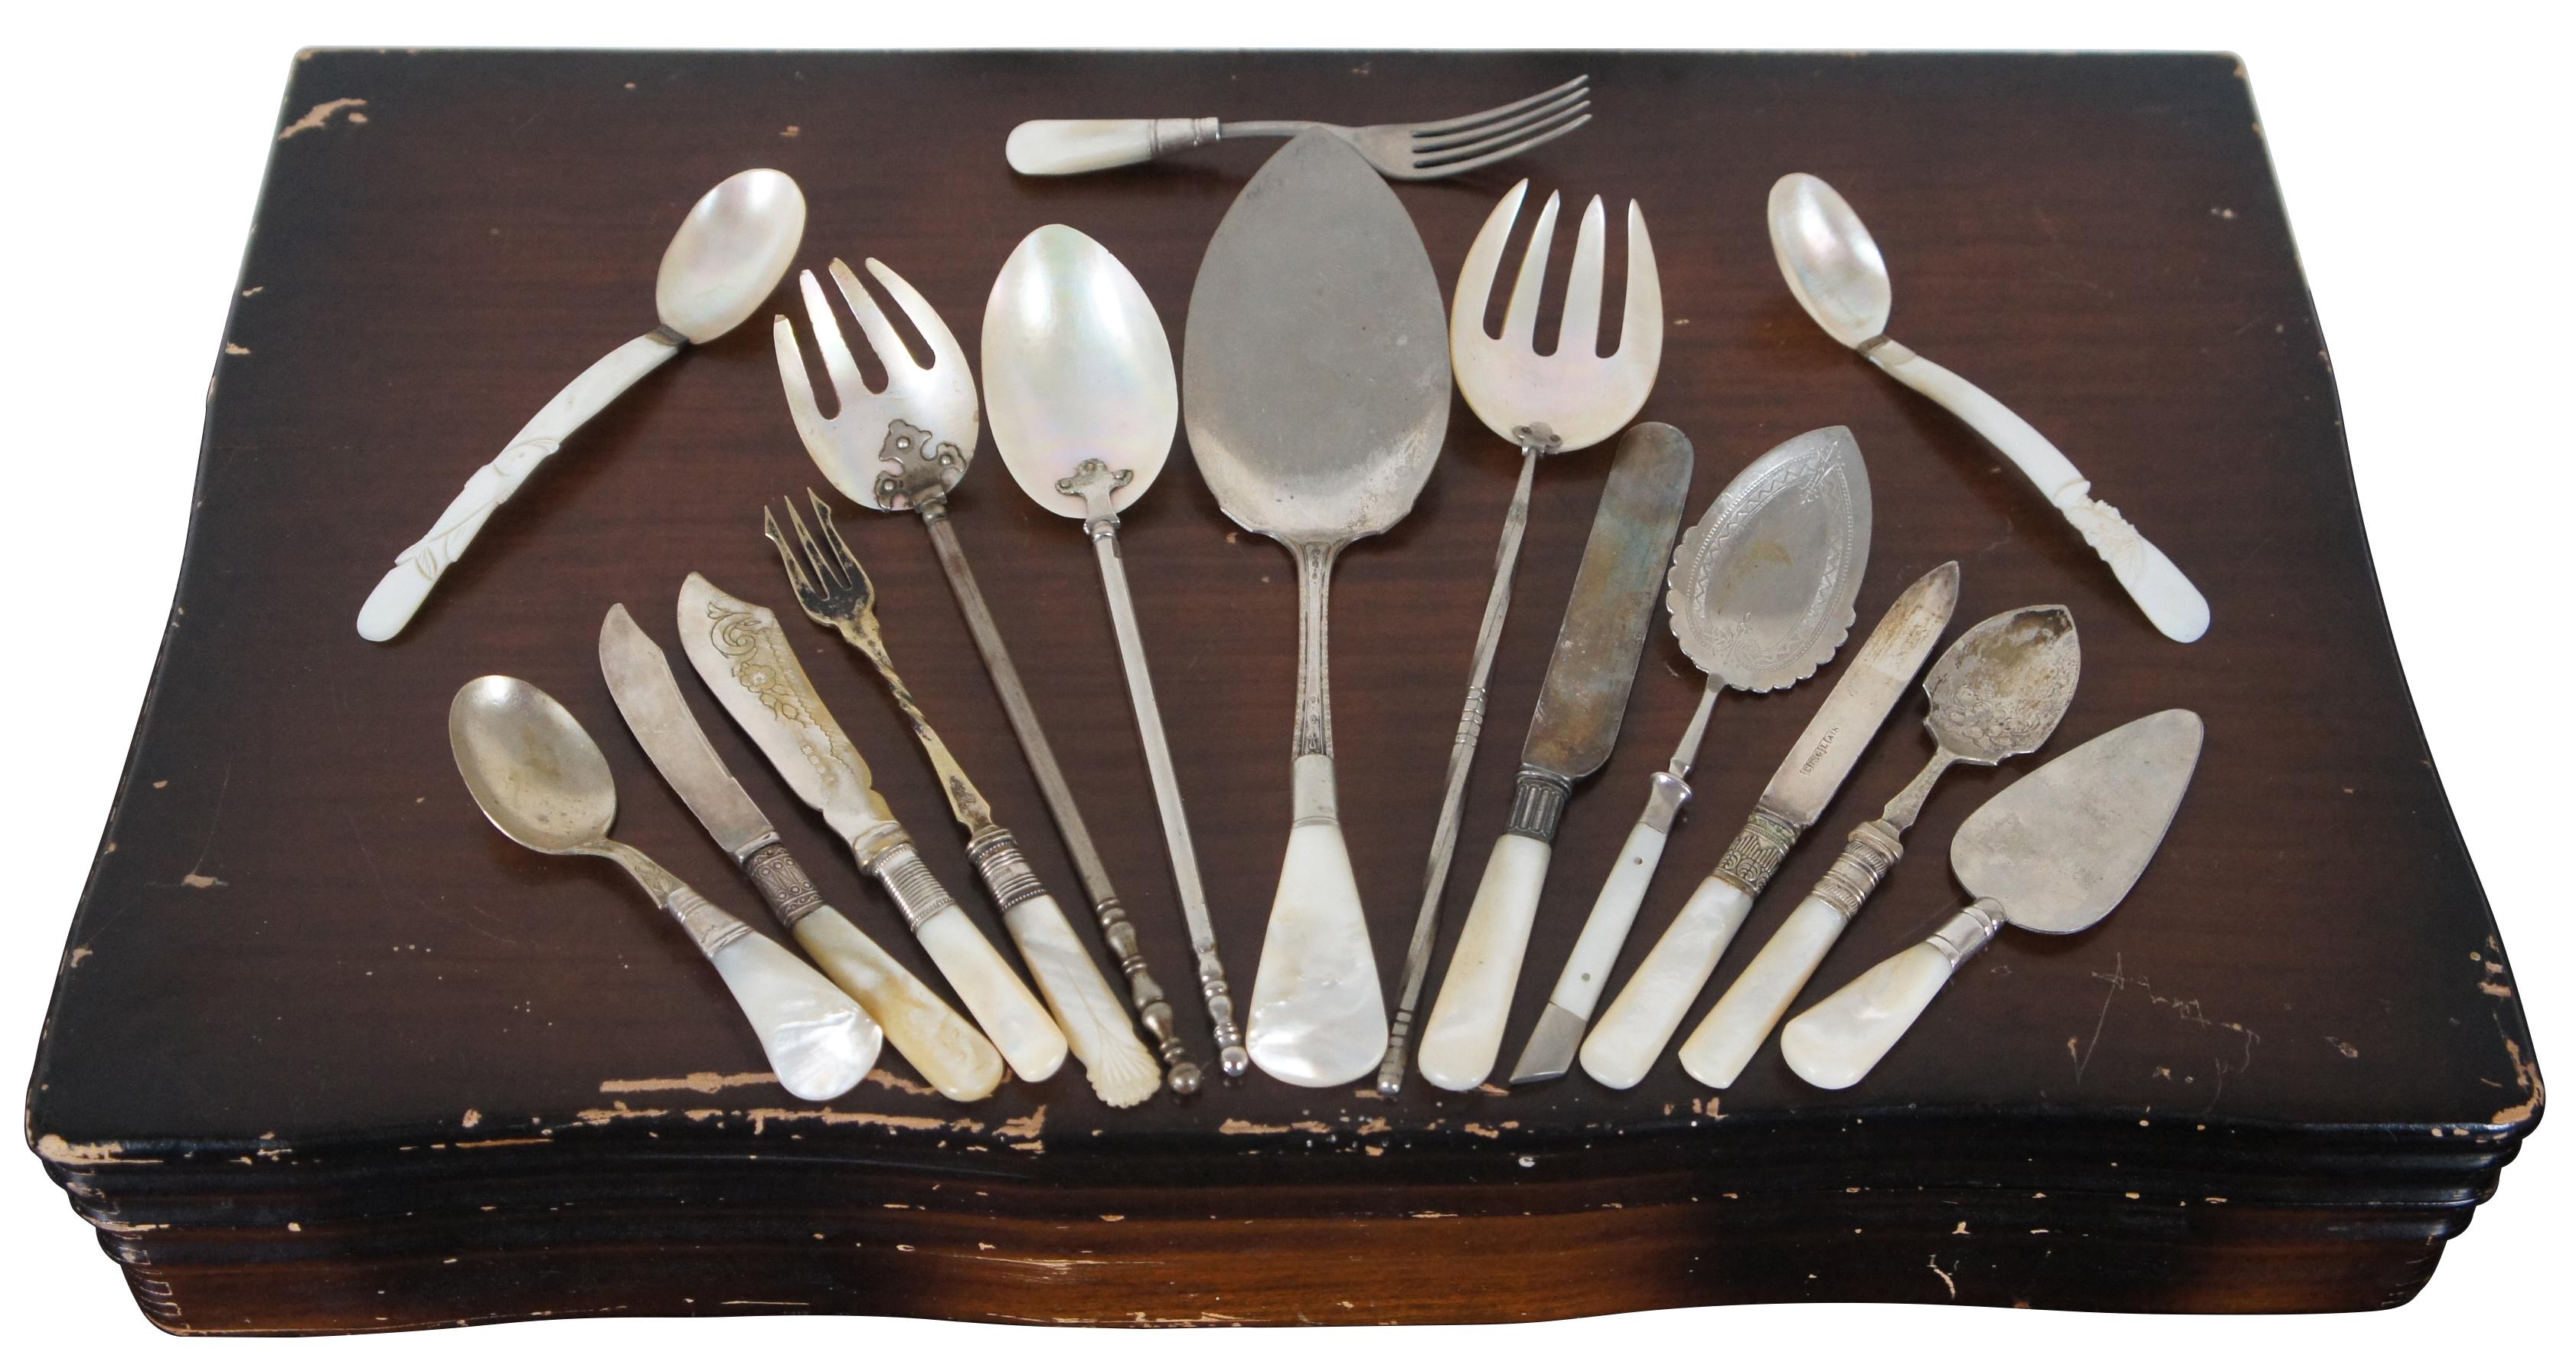 59 piece sterling silver and mother of pearl flatware set and wood chest, primarily by Landers, Frary & Clark with additional assorted pieces.

Measures: Chest - 20” x 12.5” x 3.5” / 12 LF&C sterling table knives - 9.5” x 0.875” - 54.5 g / 12 LF&C